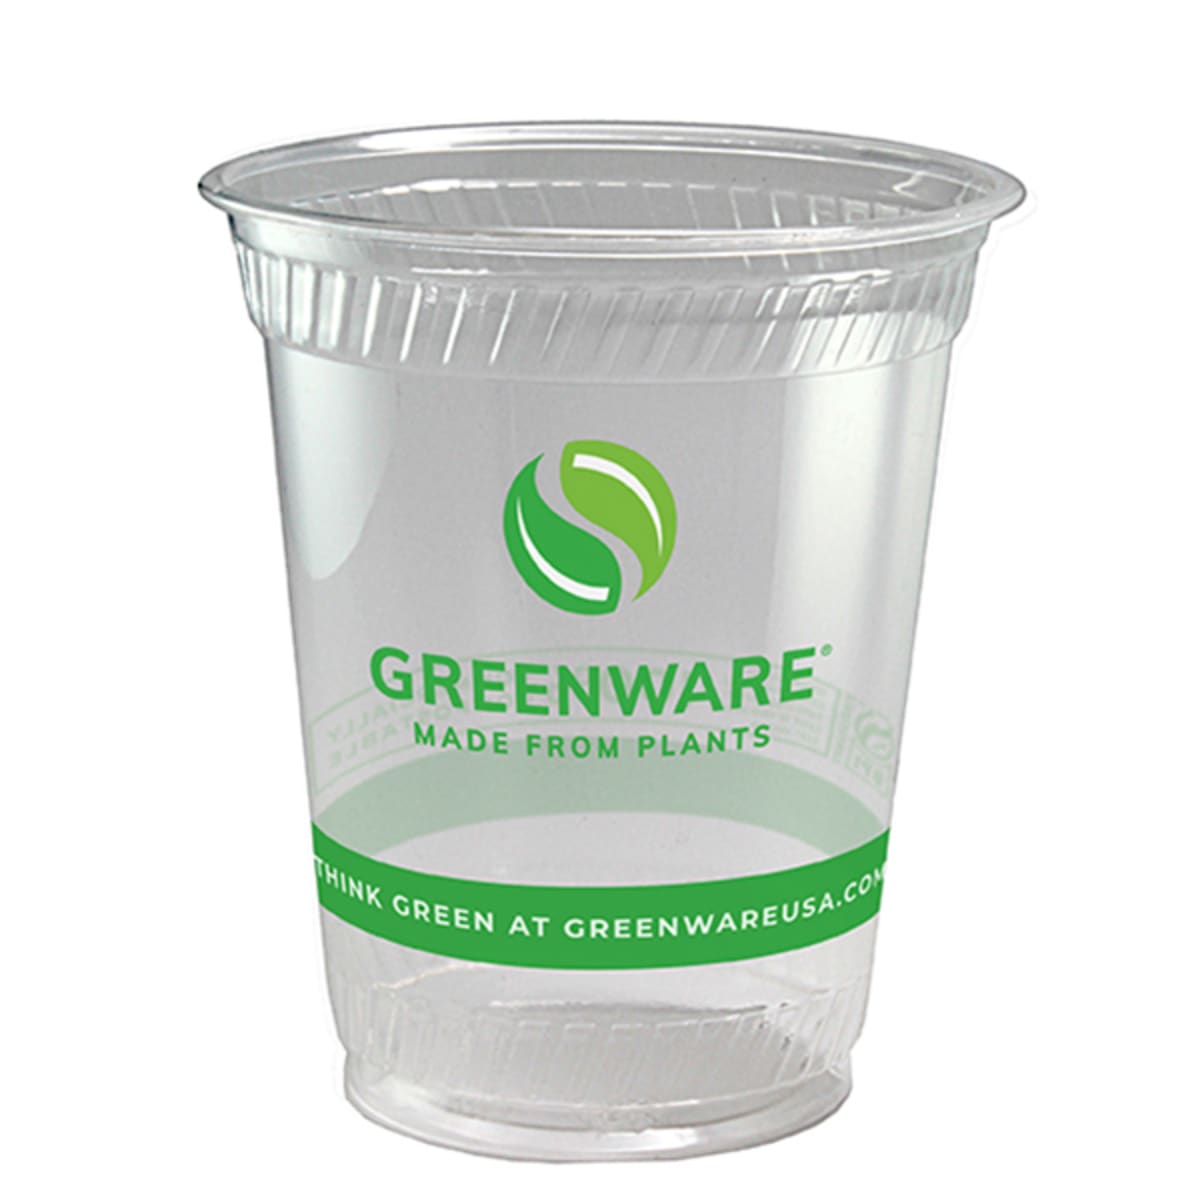 Fabri-Kal GS6-4S Greenware 16.7 oz. Shallow 4-Compartment Clear